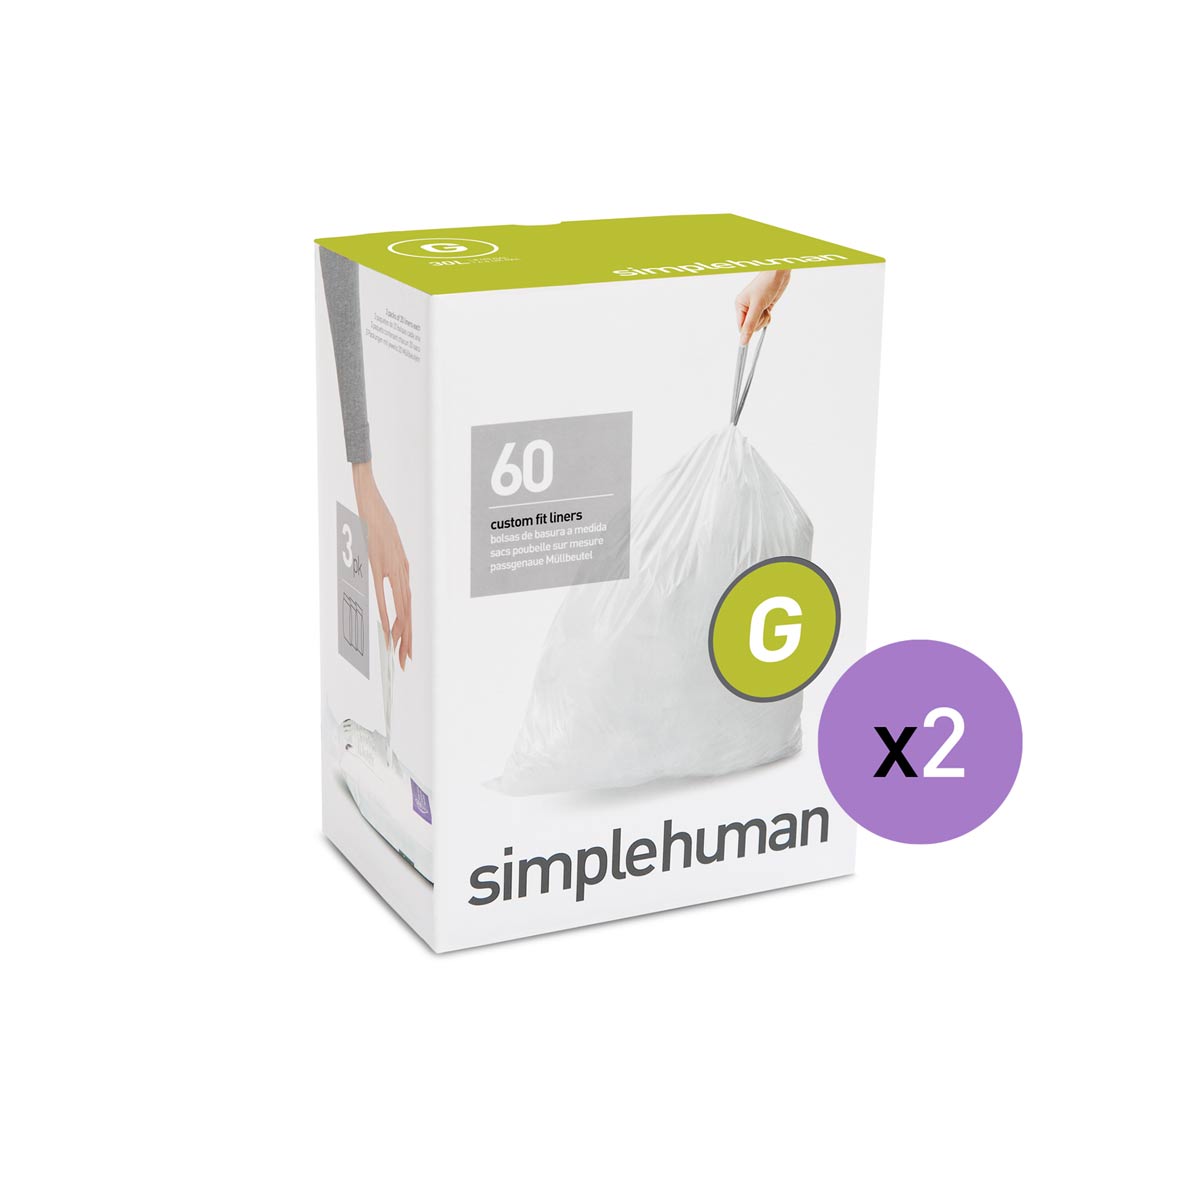 Simplehuman Size T Bin LinersCW0216 Small Simple Human Bags 3 Litre Code T